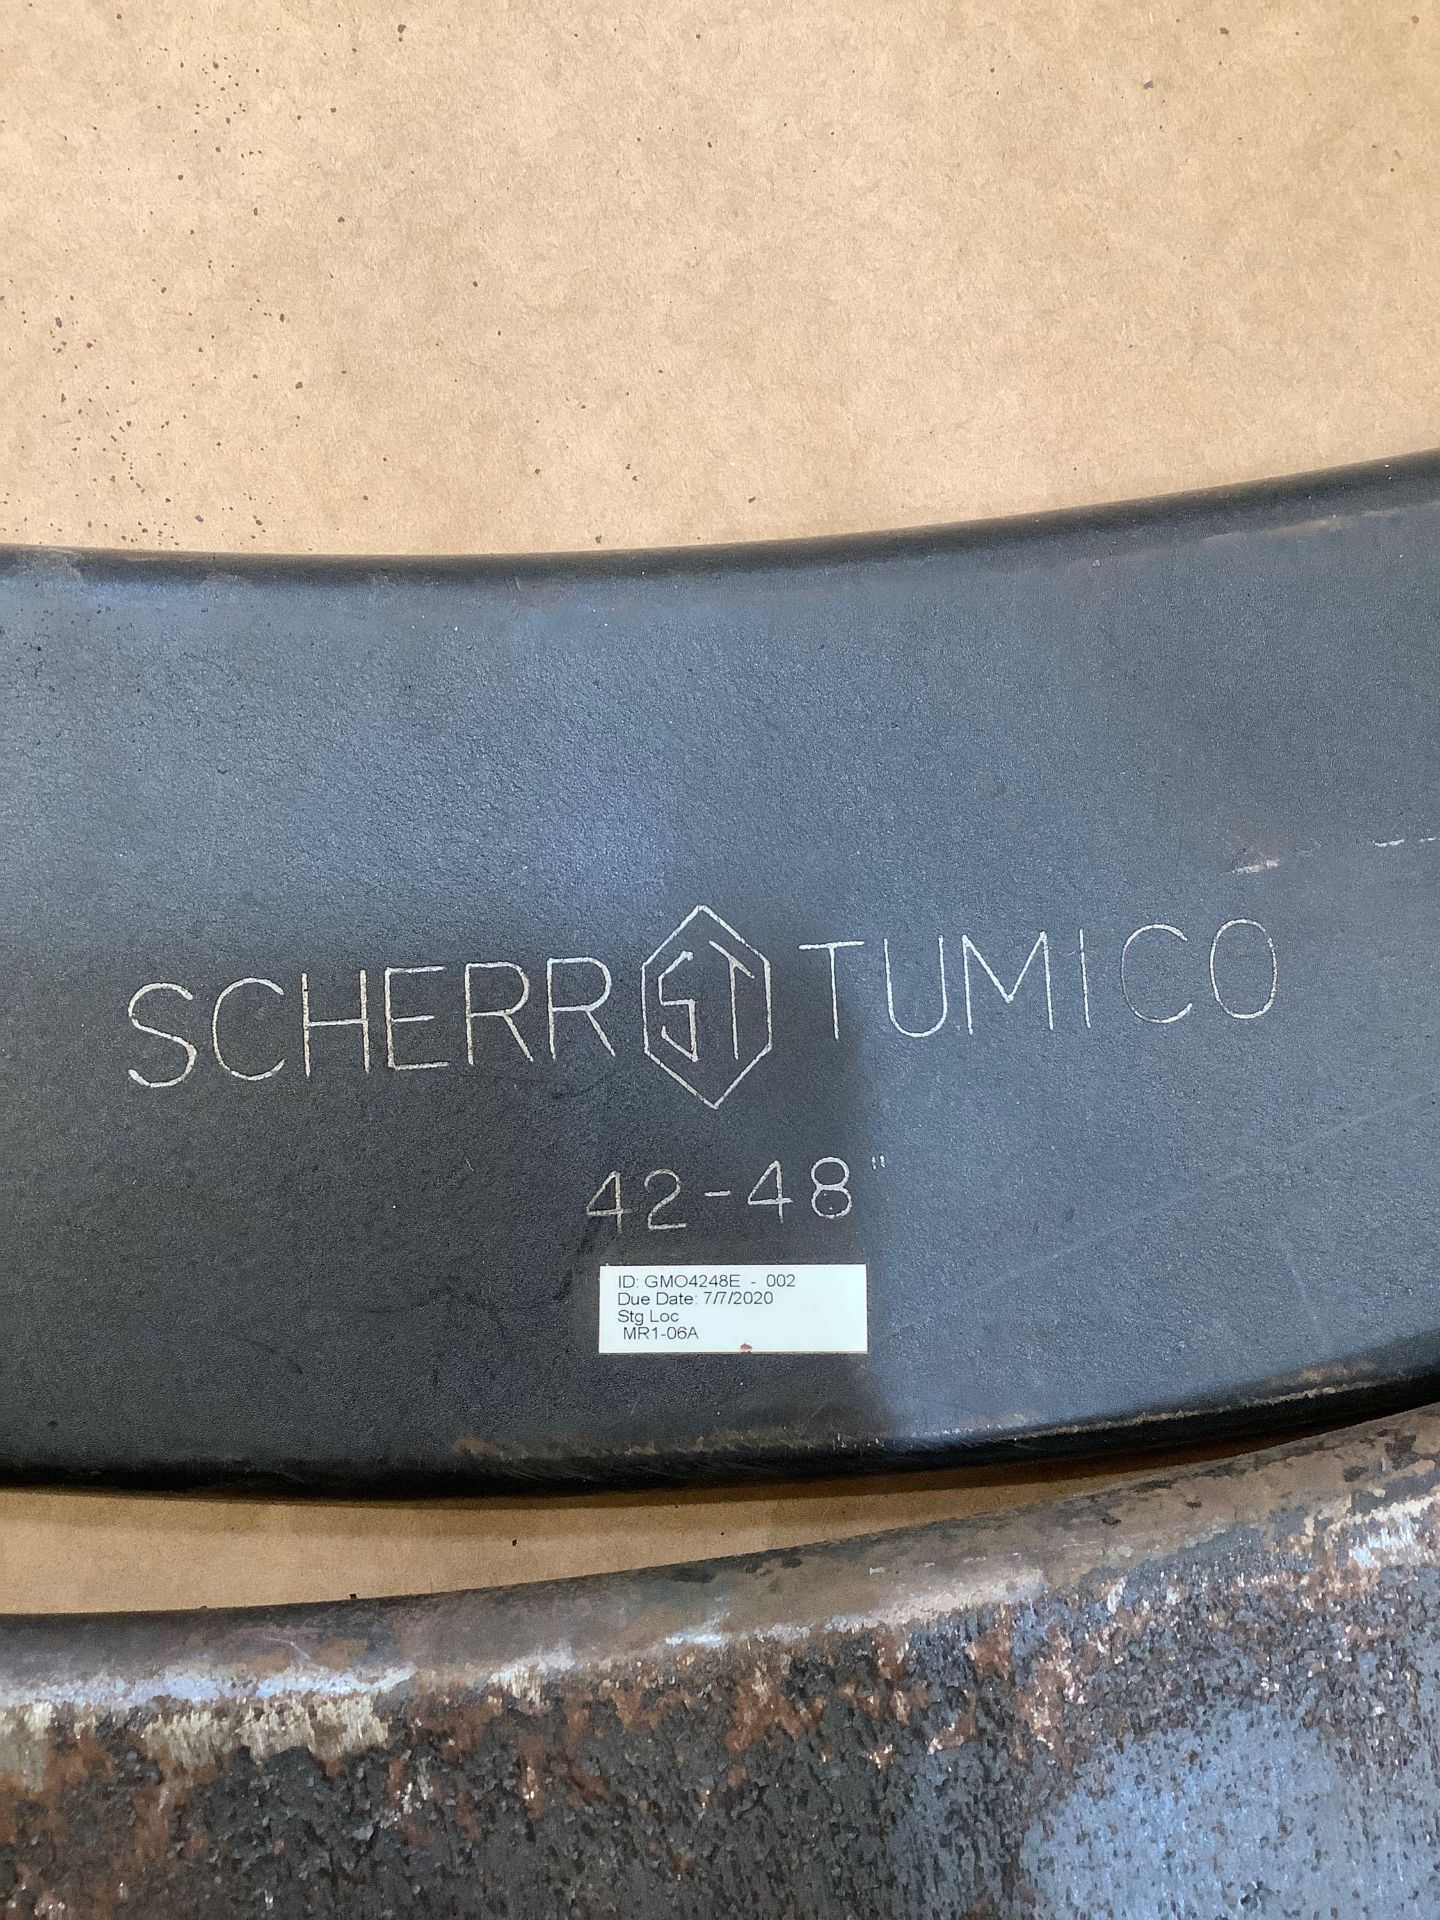 Lot of 2: Scherr-Tumico O.D. Micrometers - Image 2 of 3